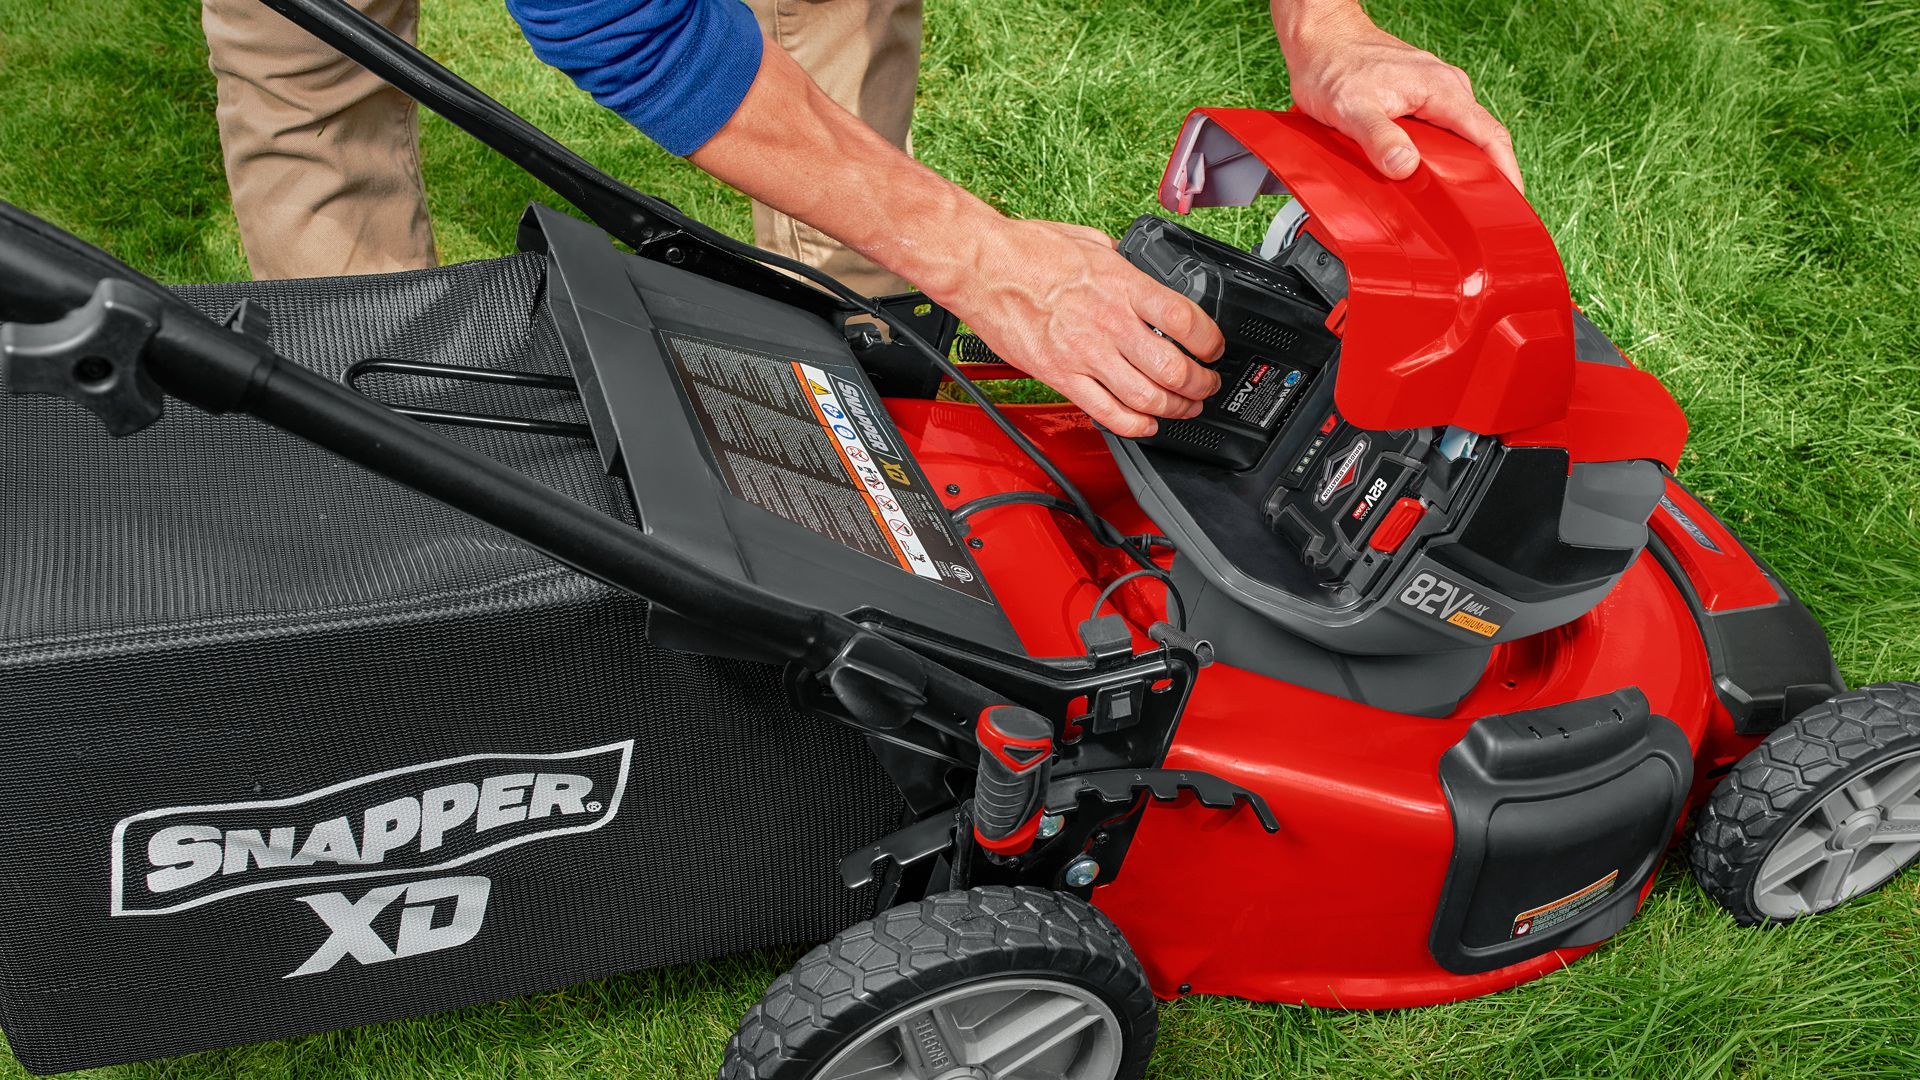 Snapper XD 82V Review - Snapper's Battery Powered Lawn Mower